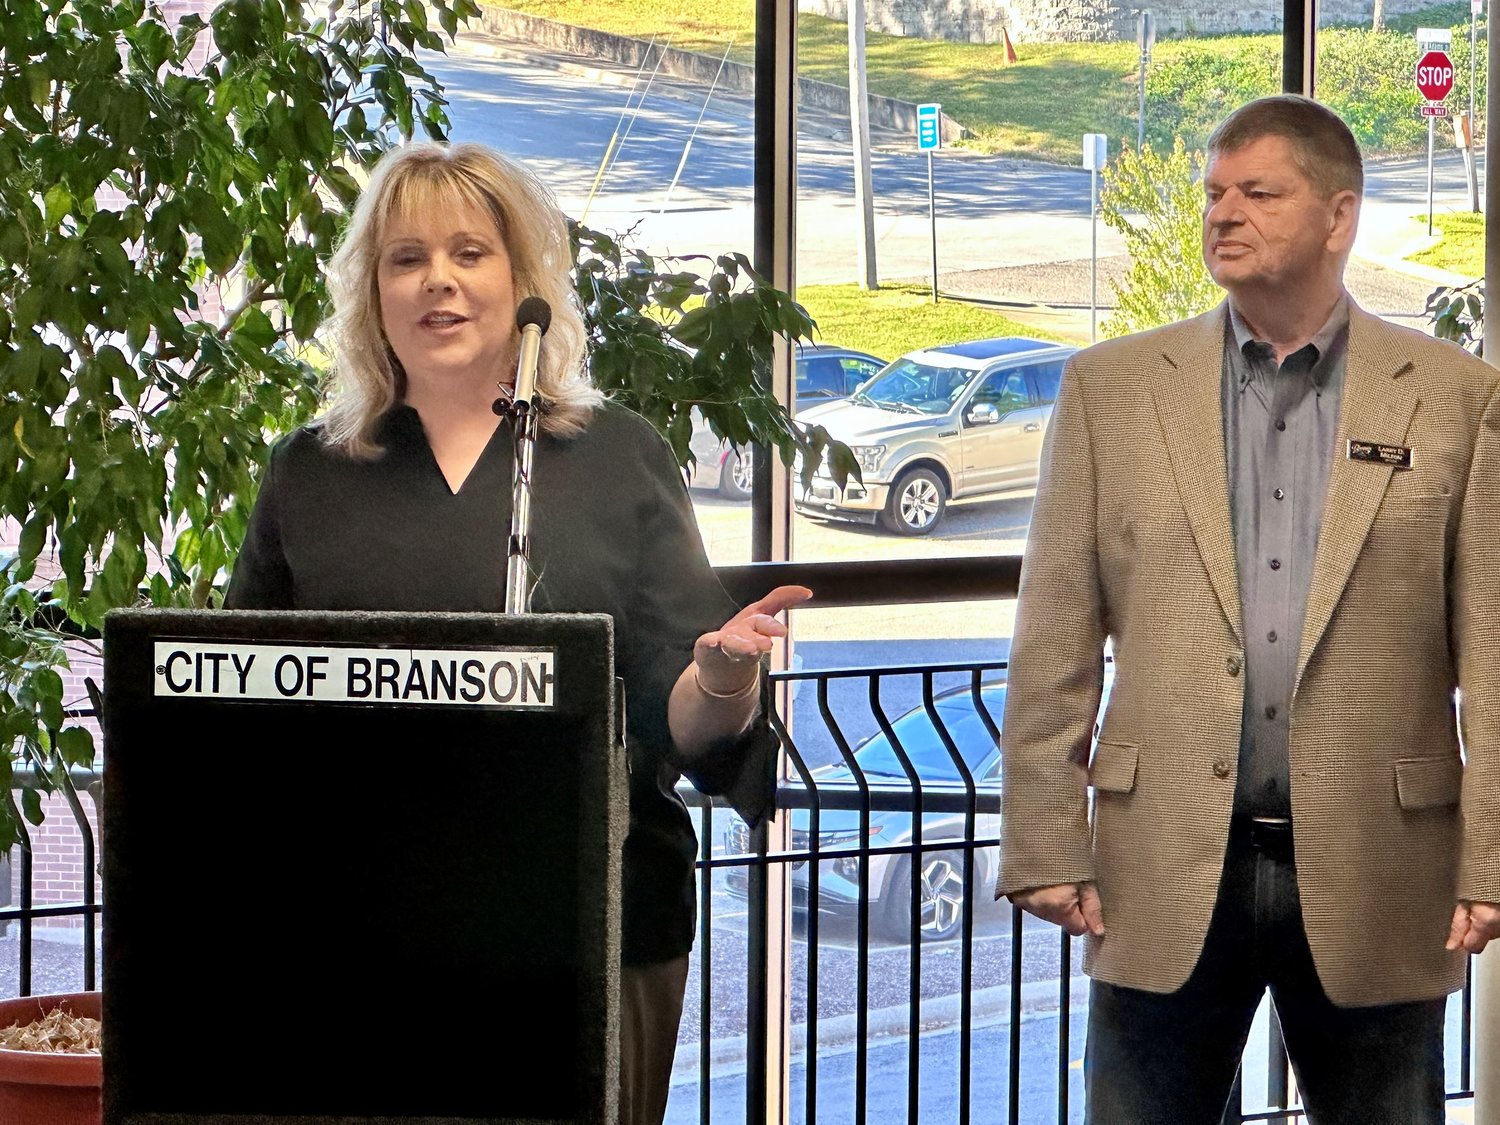 Cathy Stepp is introduced as city administrator by Branson Mayor Larry Milton.